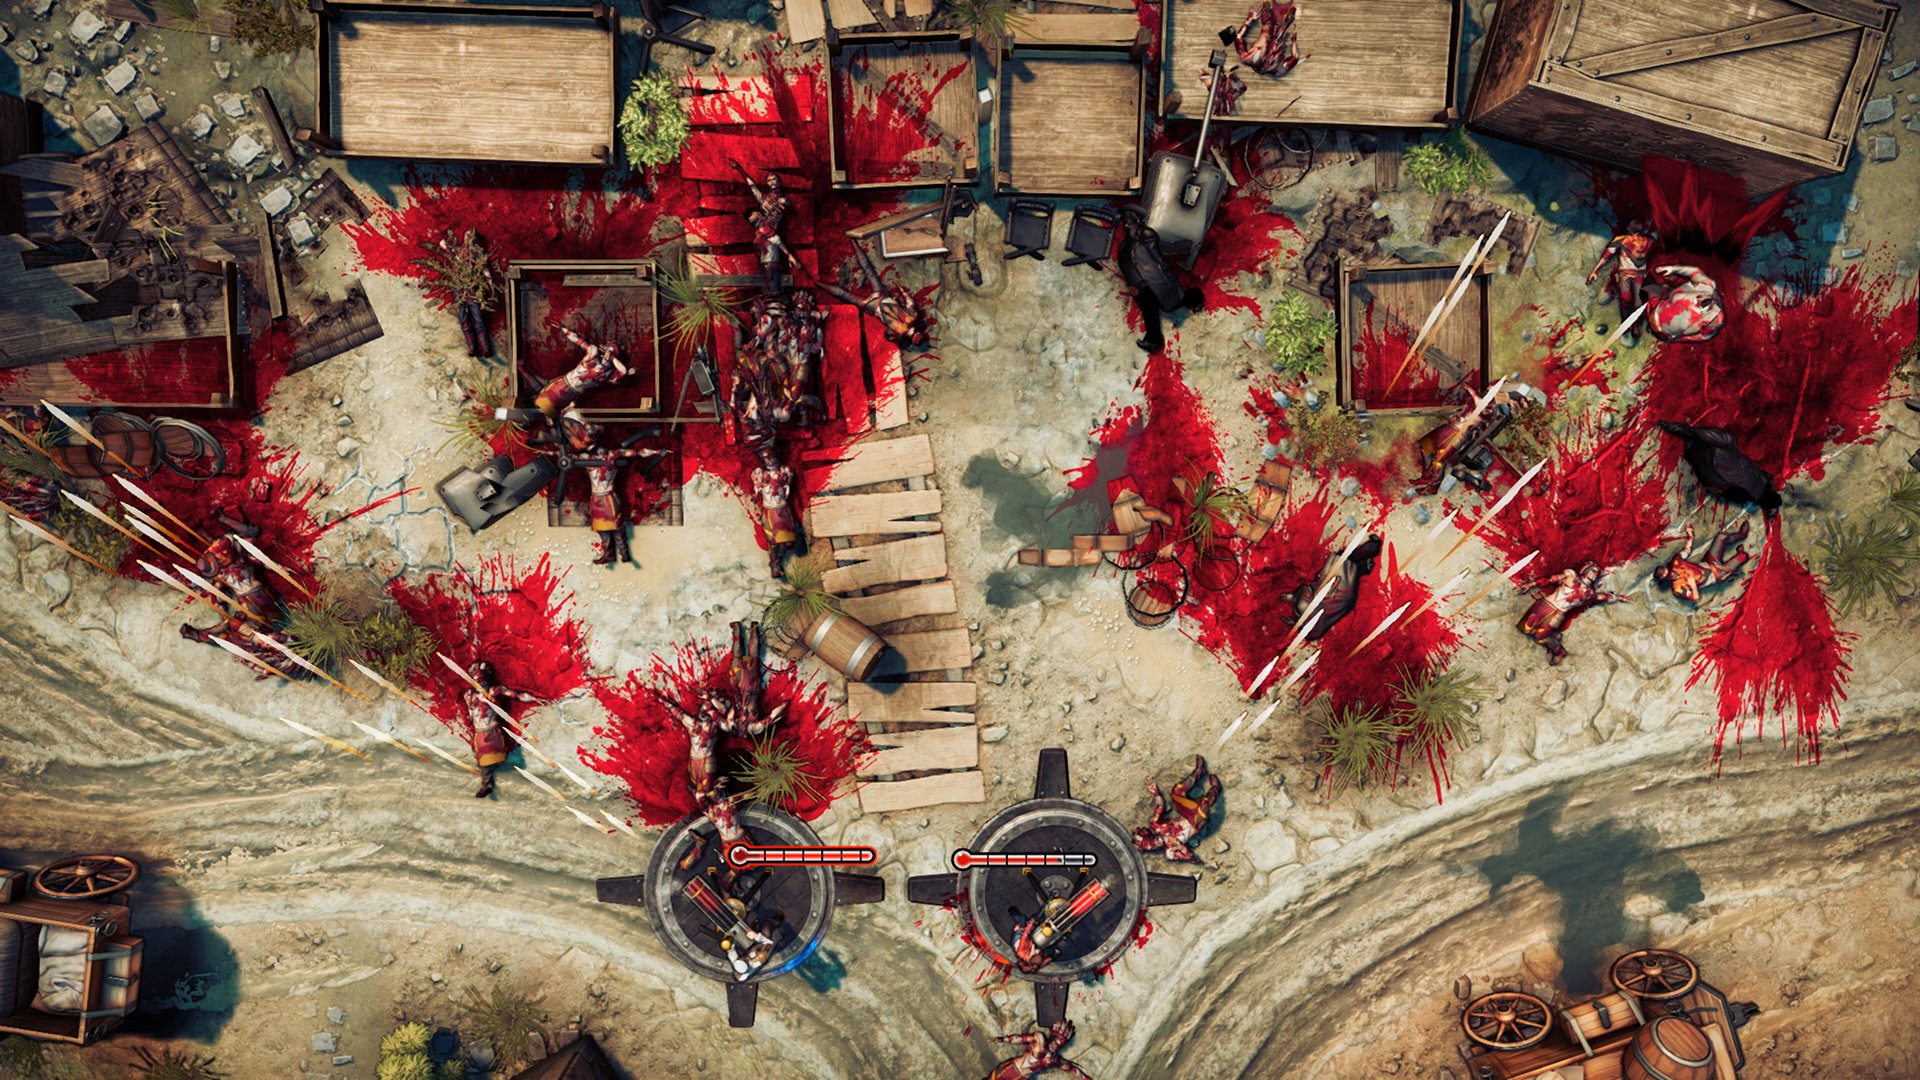 God's Trigger PC preview: A thrilling top-down shooter that shows immense Central